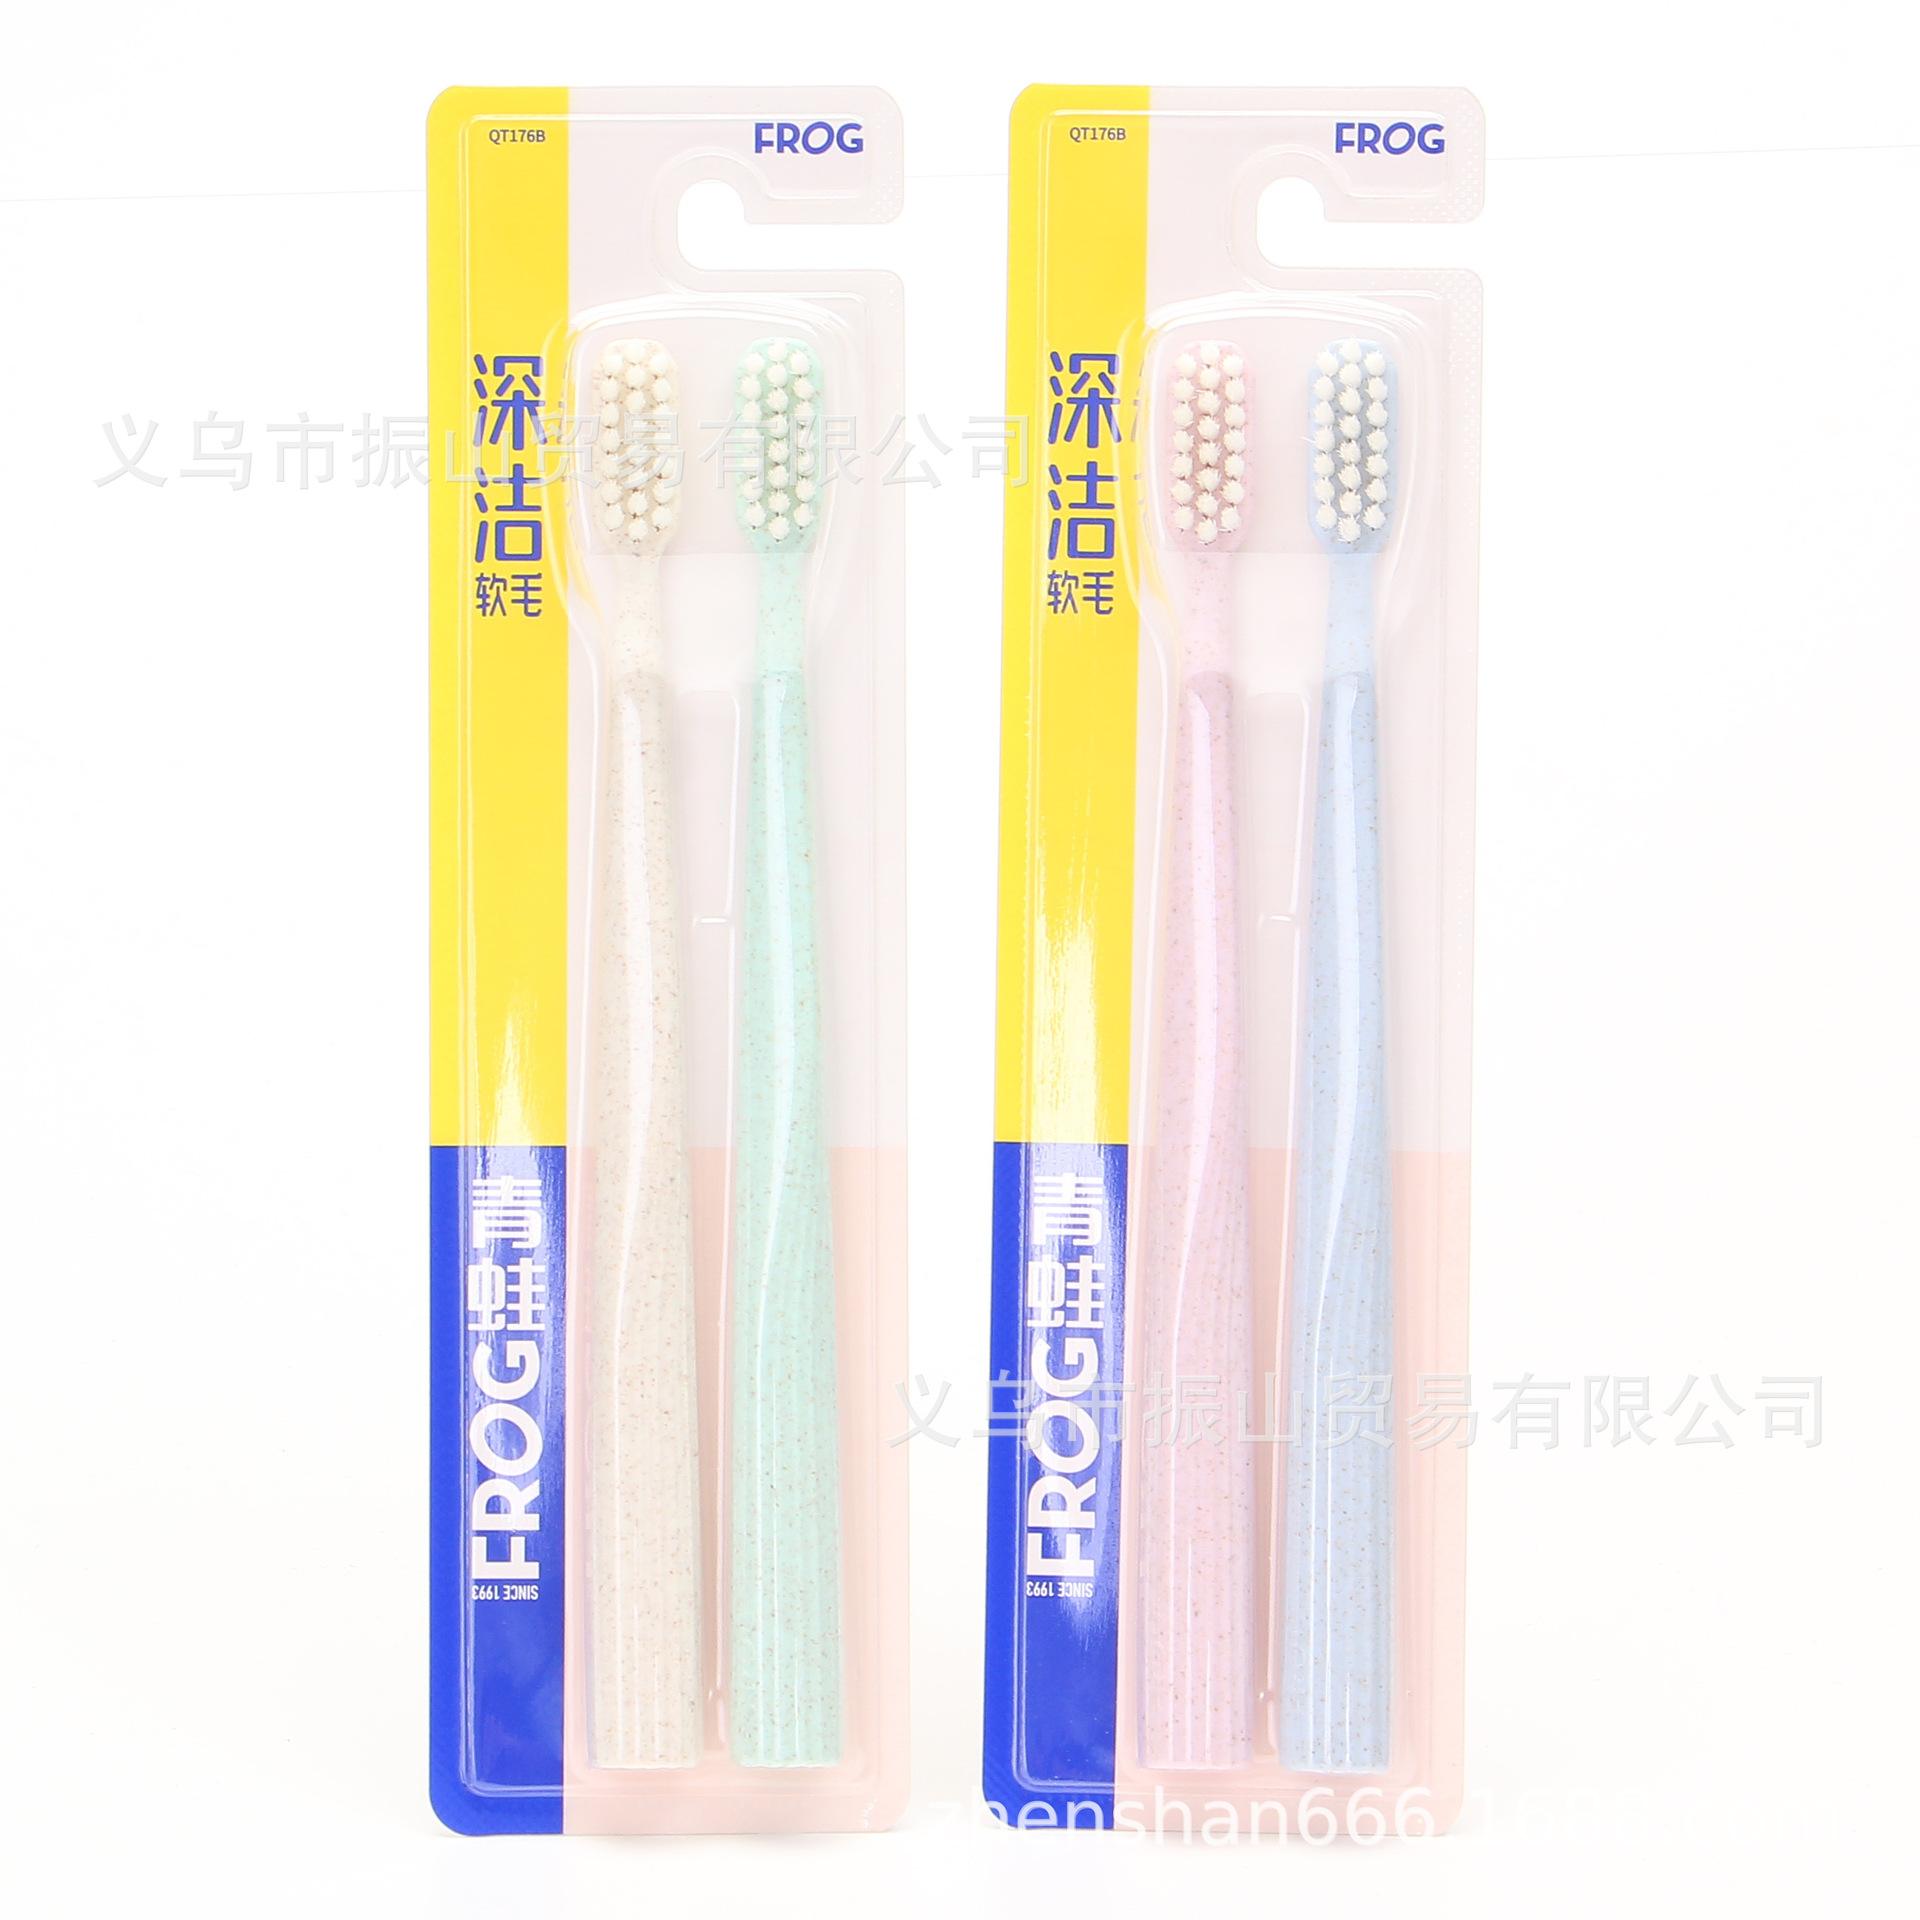 Frog 176B Pack of Two Bottles High Density Filament Filament Cleaning Teeth Double Branch Special Offer Packing Soft-Bristle Toothbrush